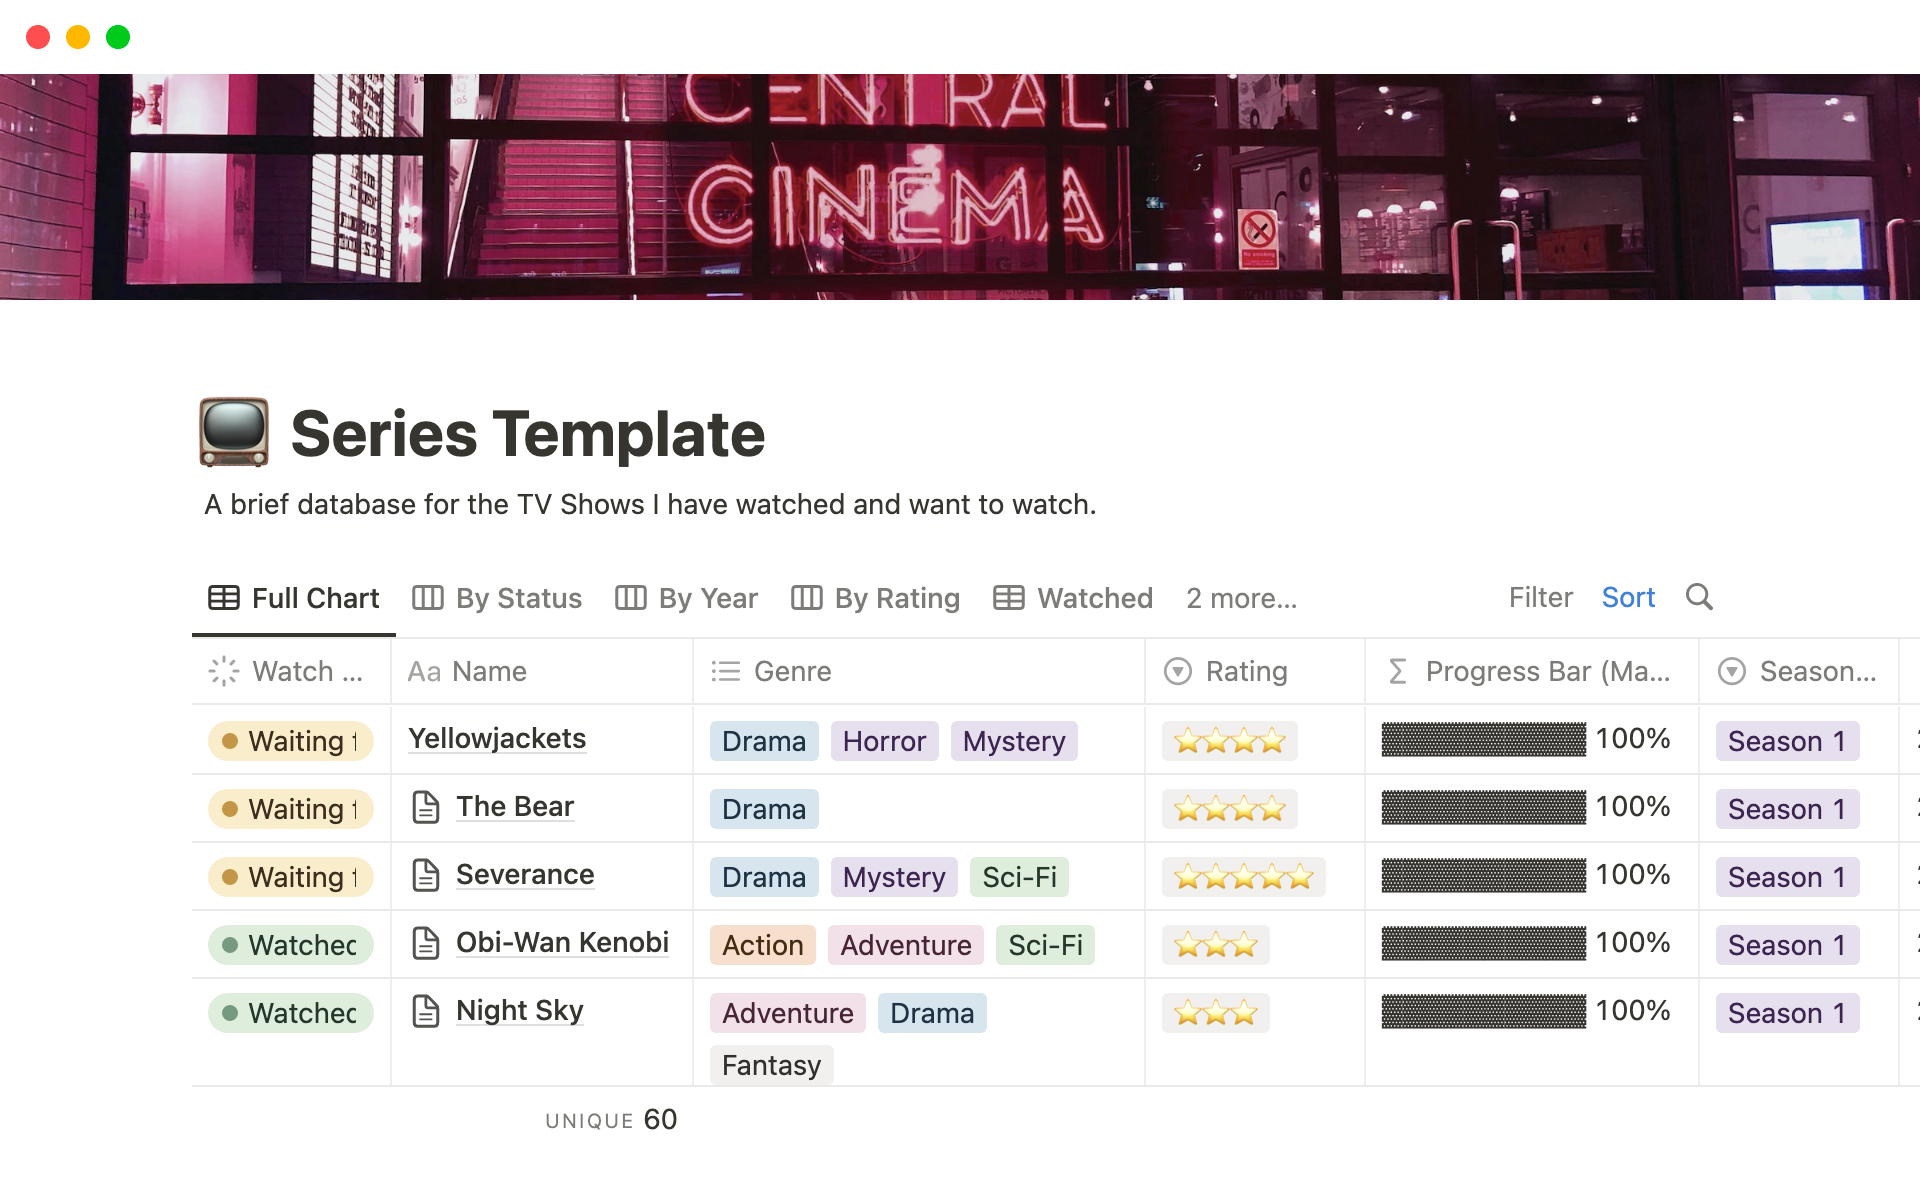 Enables you to track and rate the tv series you watch